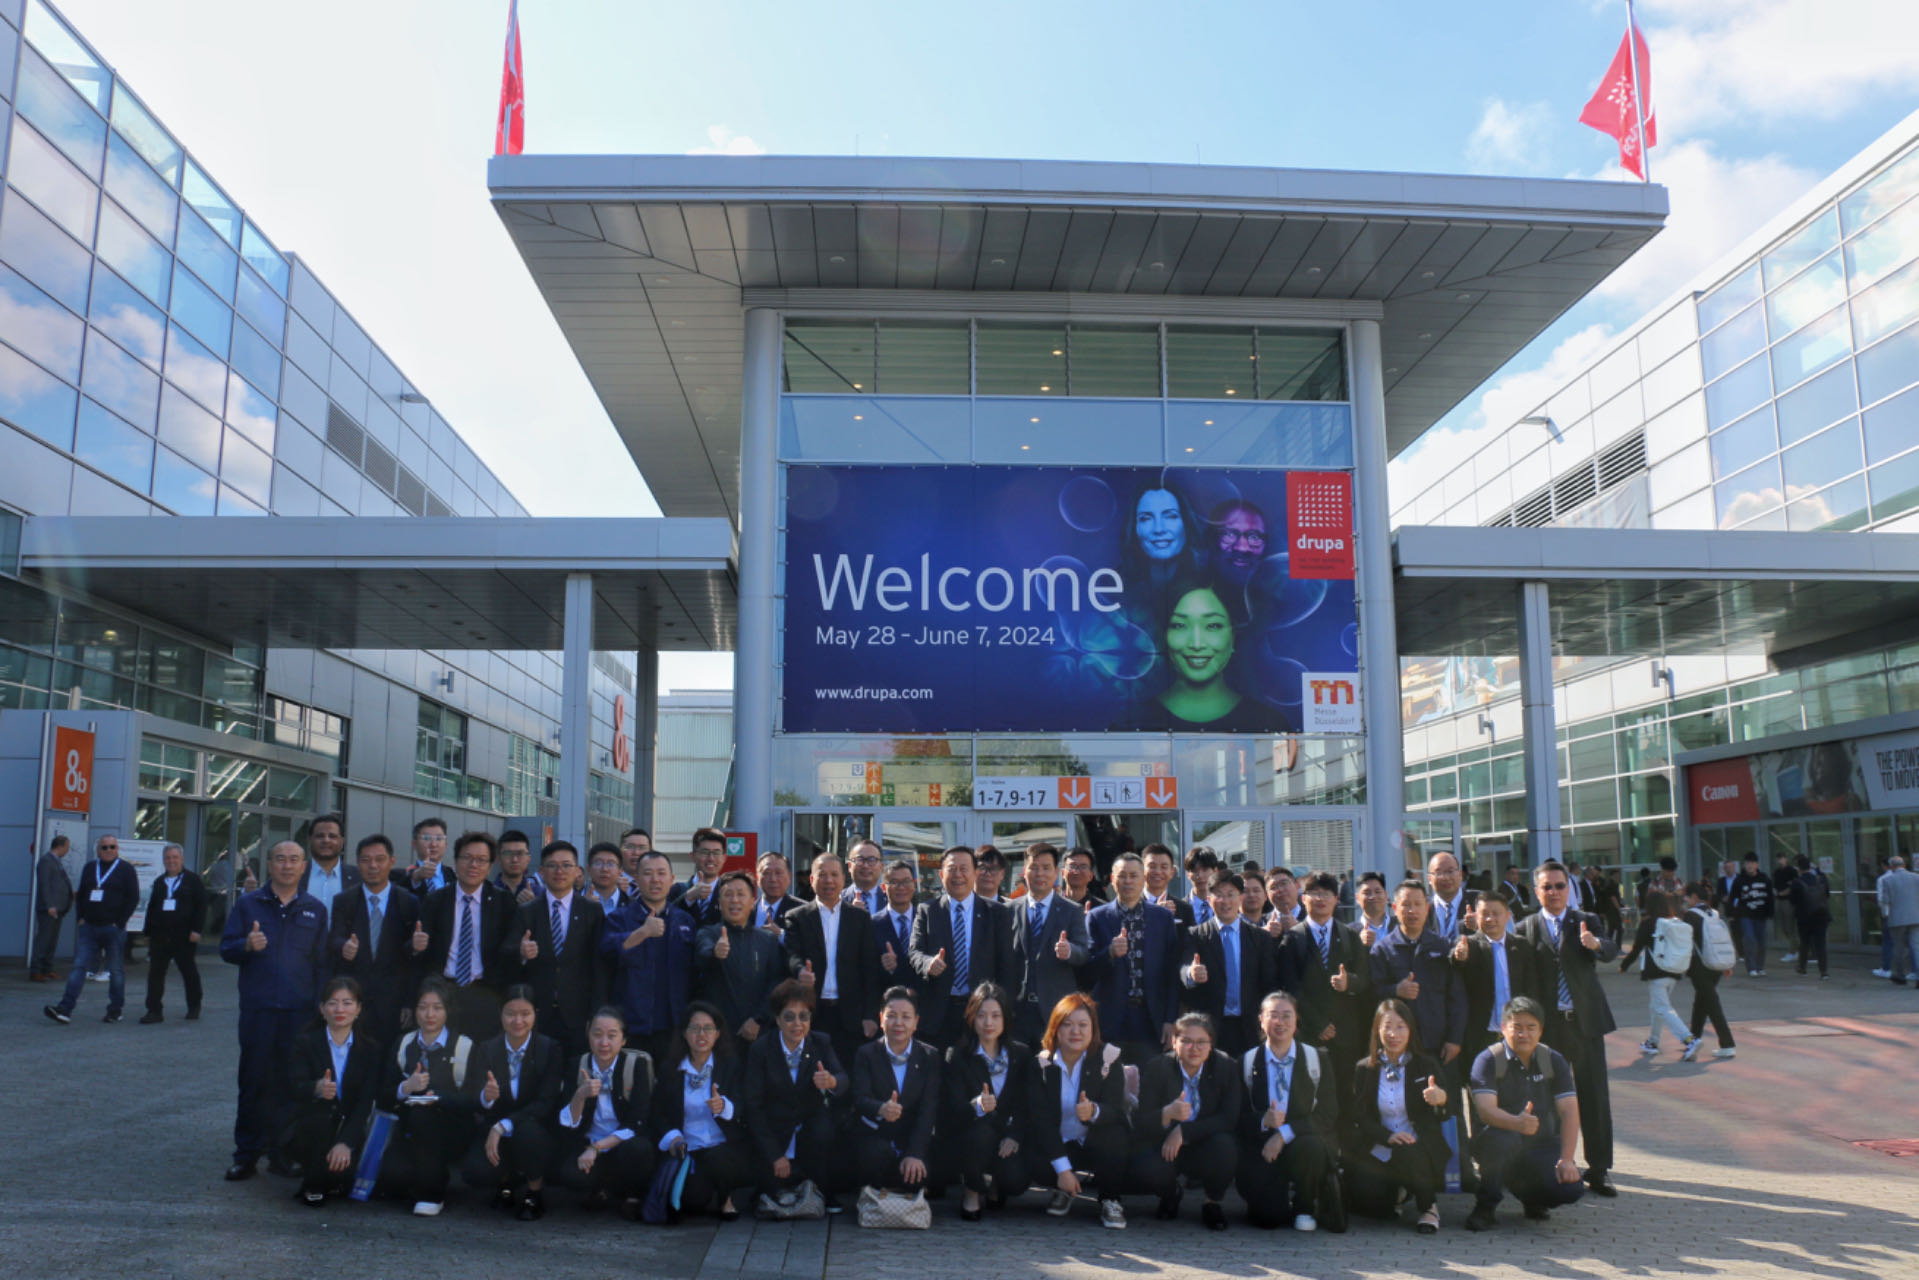 UP Group team attended the DRUPA 2024 successfully!